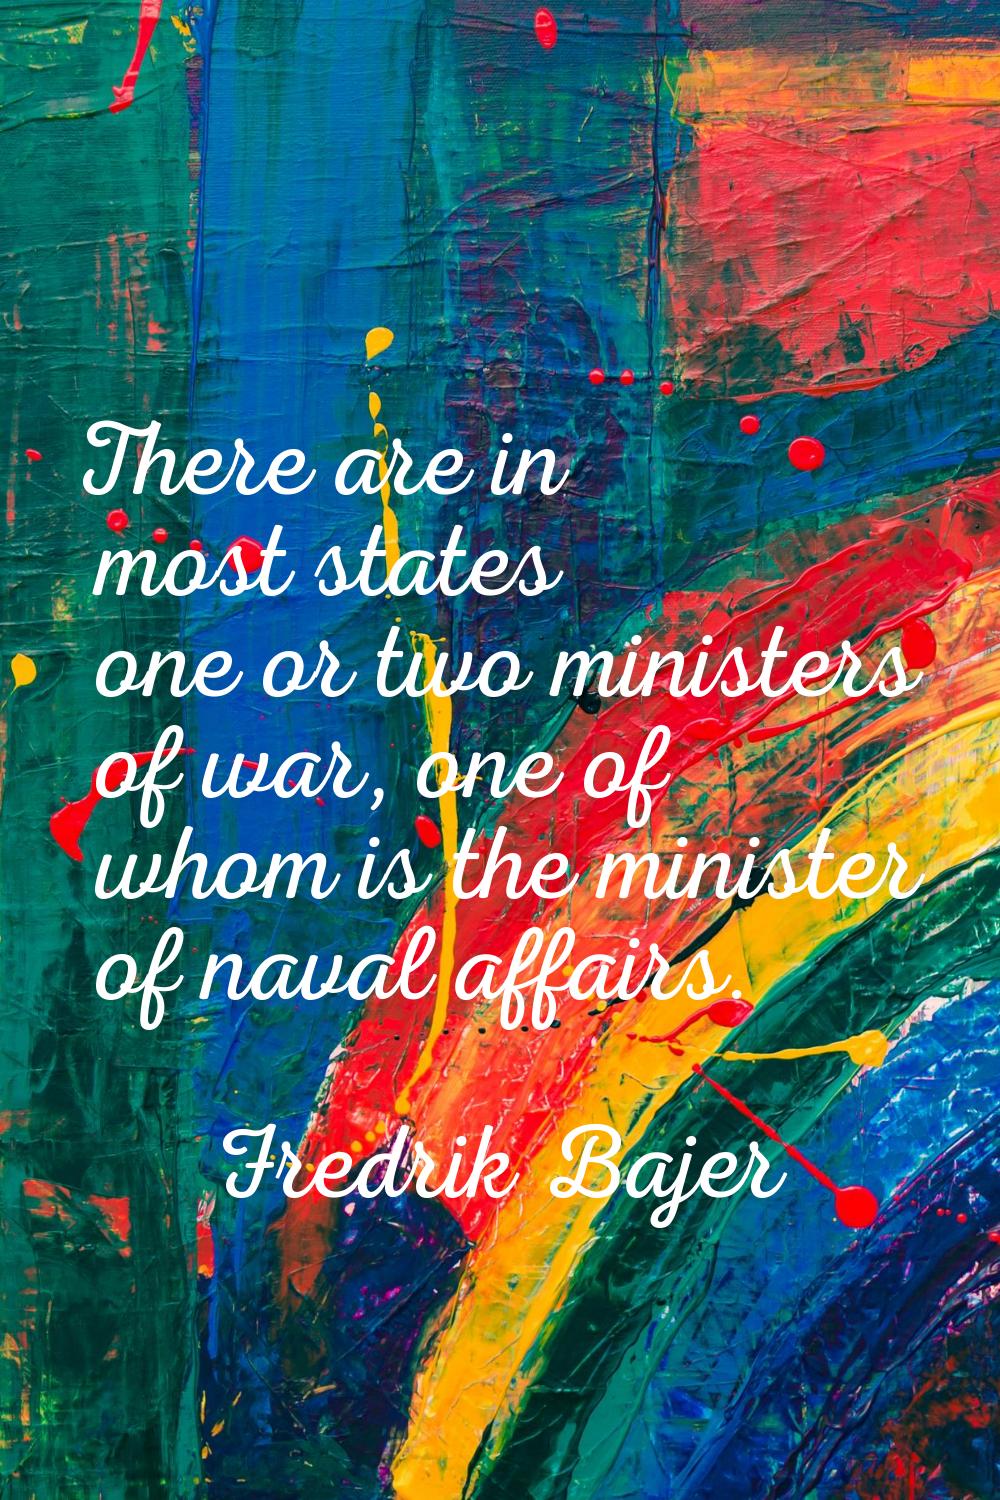 There are in most states one or two ministers of war, one of whom is the minister of naval affairs.